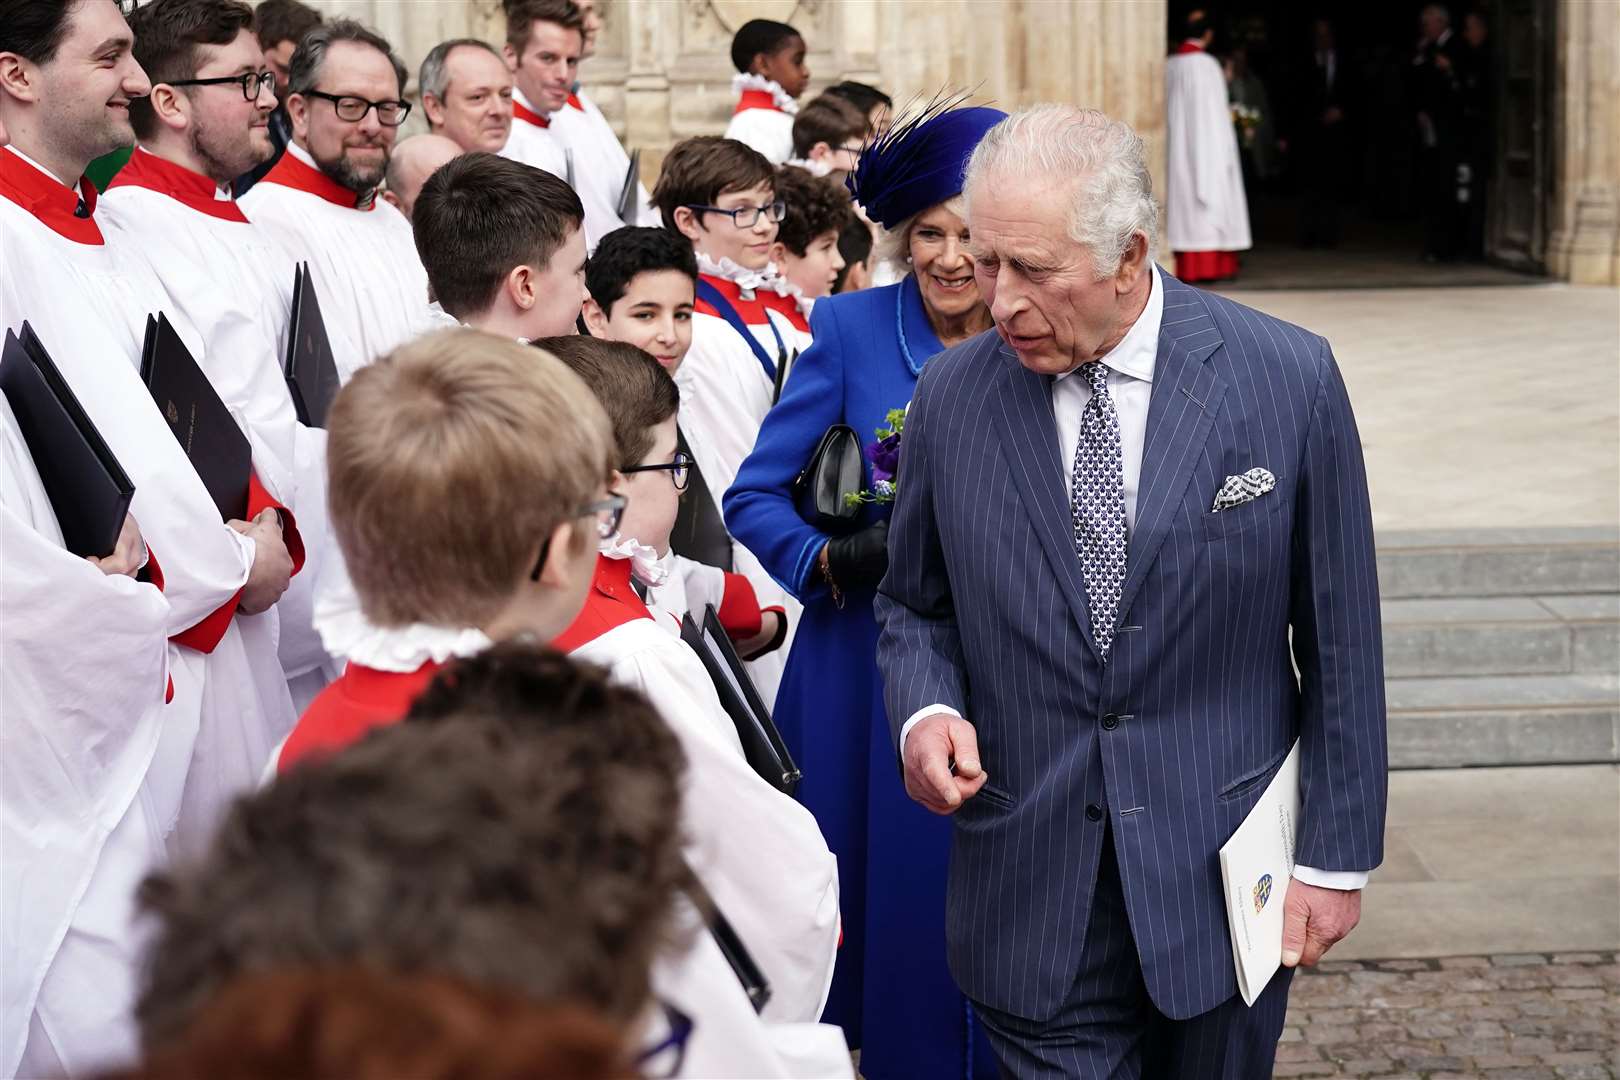 Charles meeting choristers at last year’s Commonwealth Day Service at Westminster Abbey (Jordan Pettitt/PA)